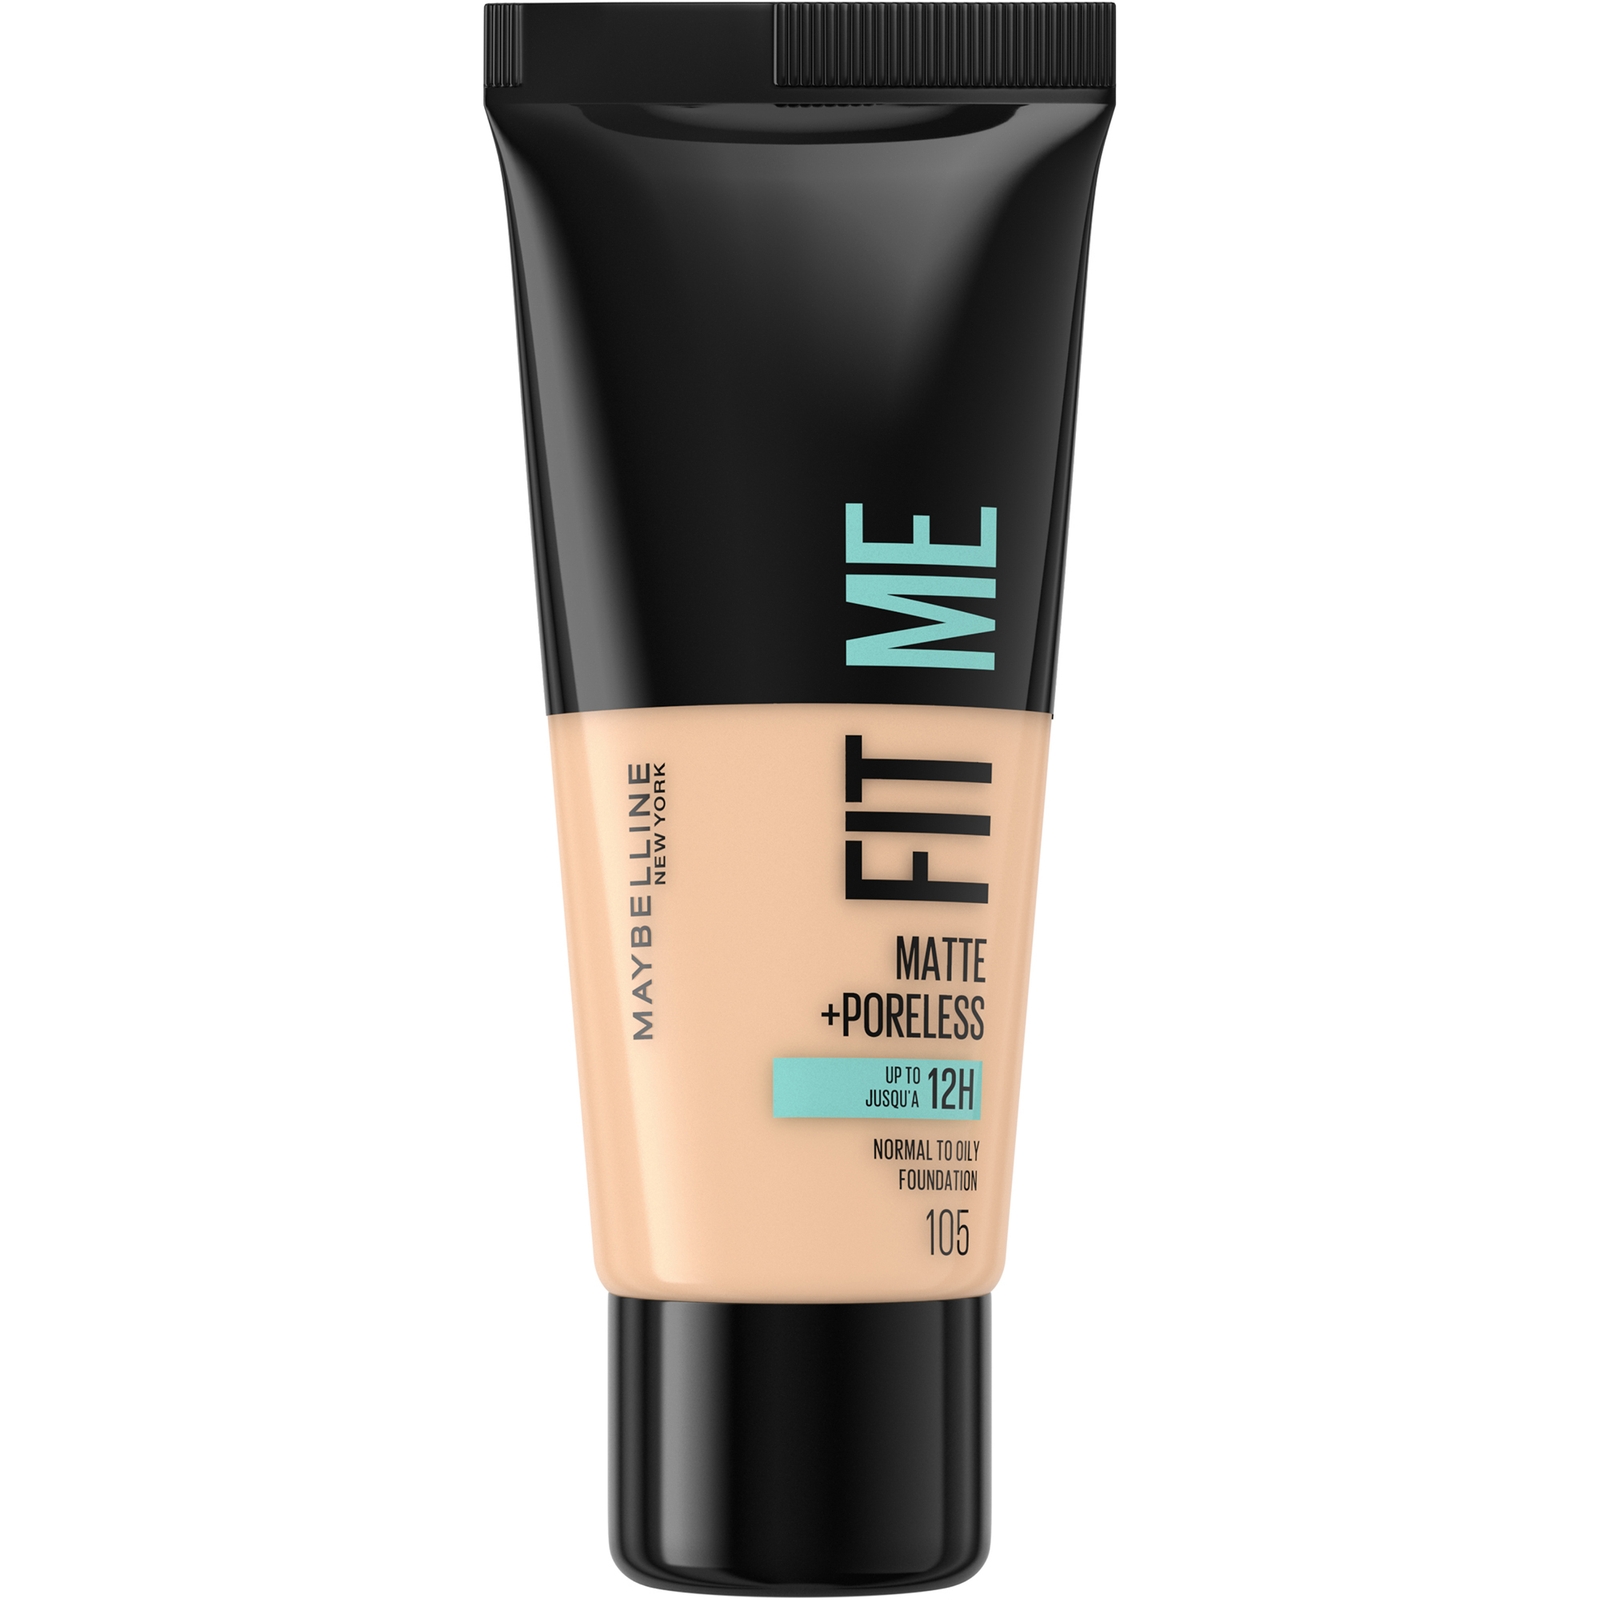 Maybelline Fit Me! Matte and Poreless Foundation 30ml (Various Shades) - 105 Natural Ivory